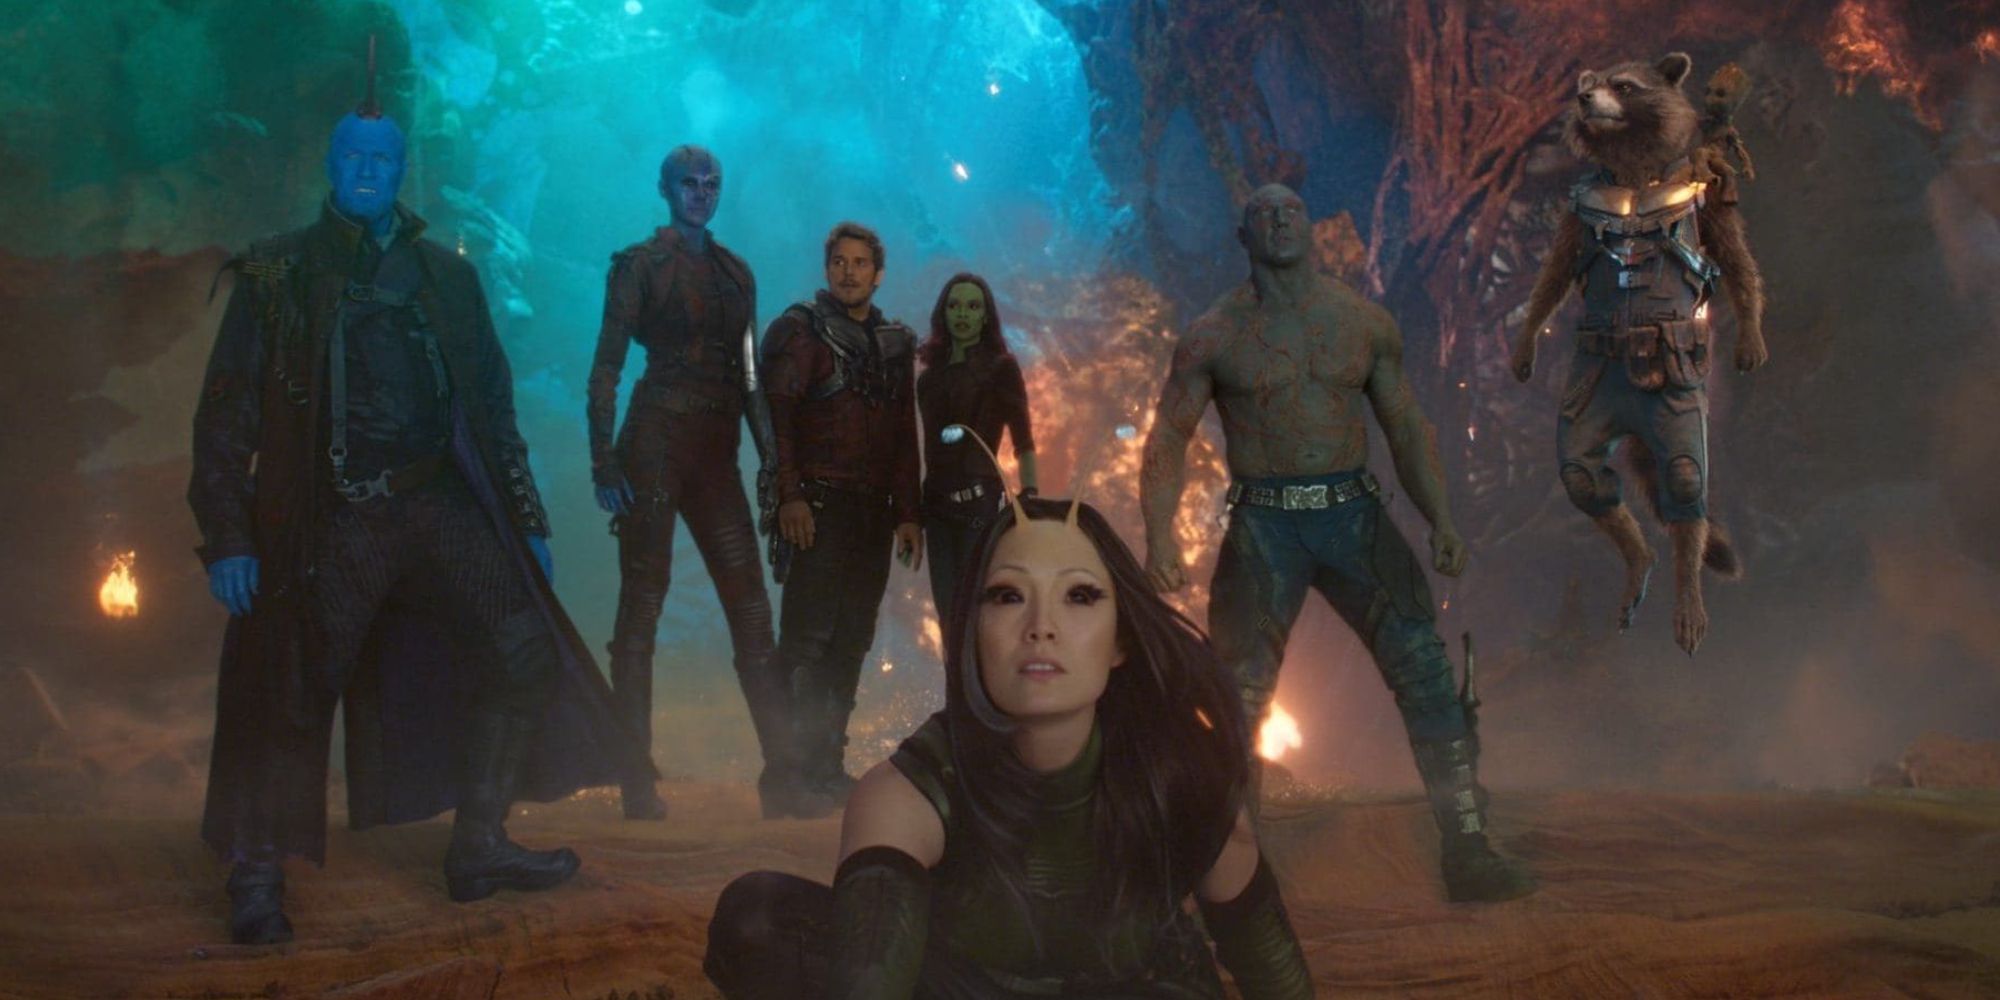 The Guardians of the Galaxy, plus Mantis and Yondu, posing in an action shot from the second film